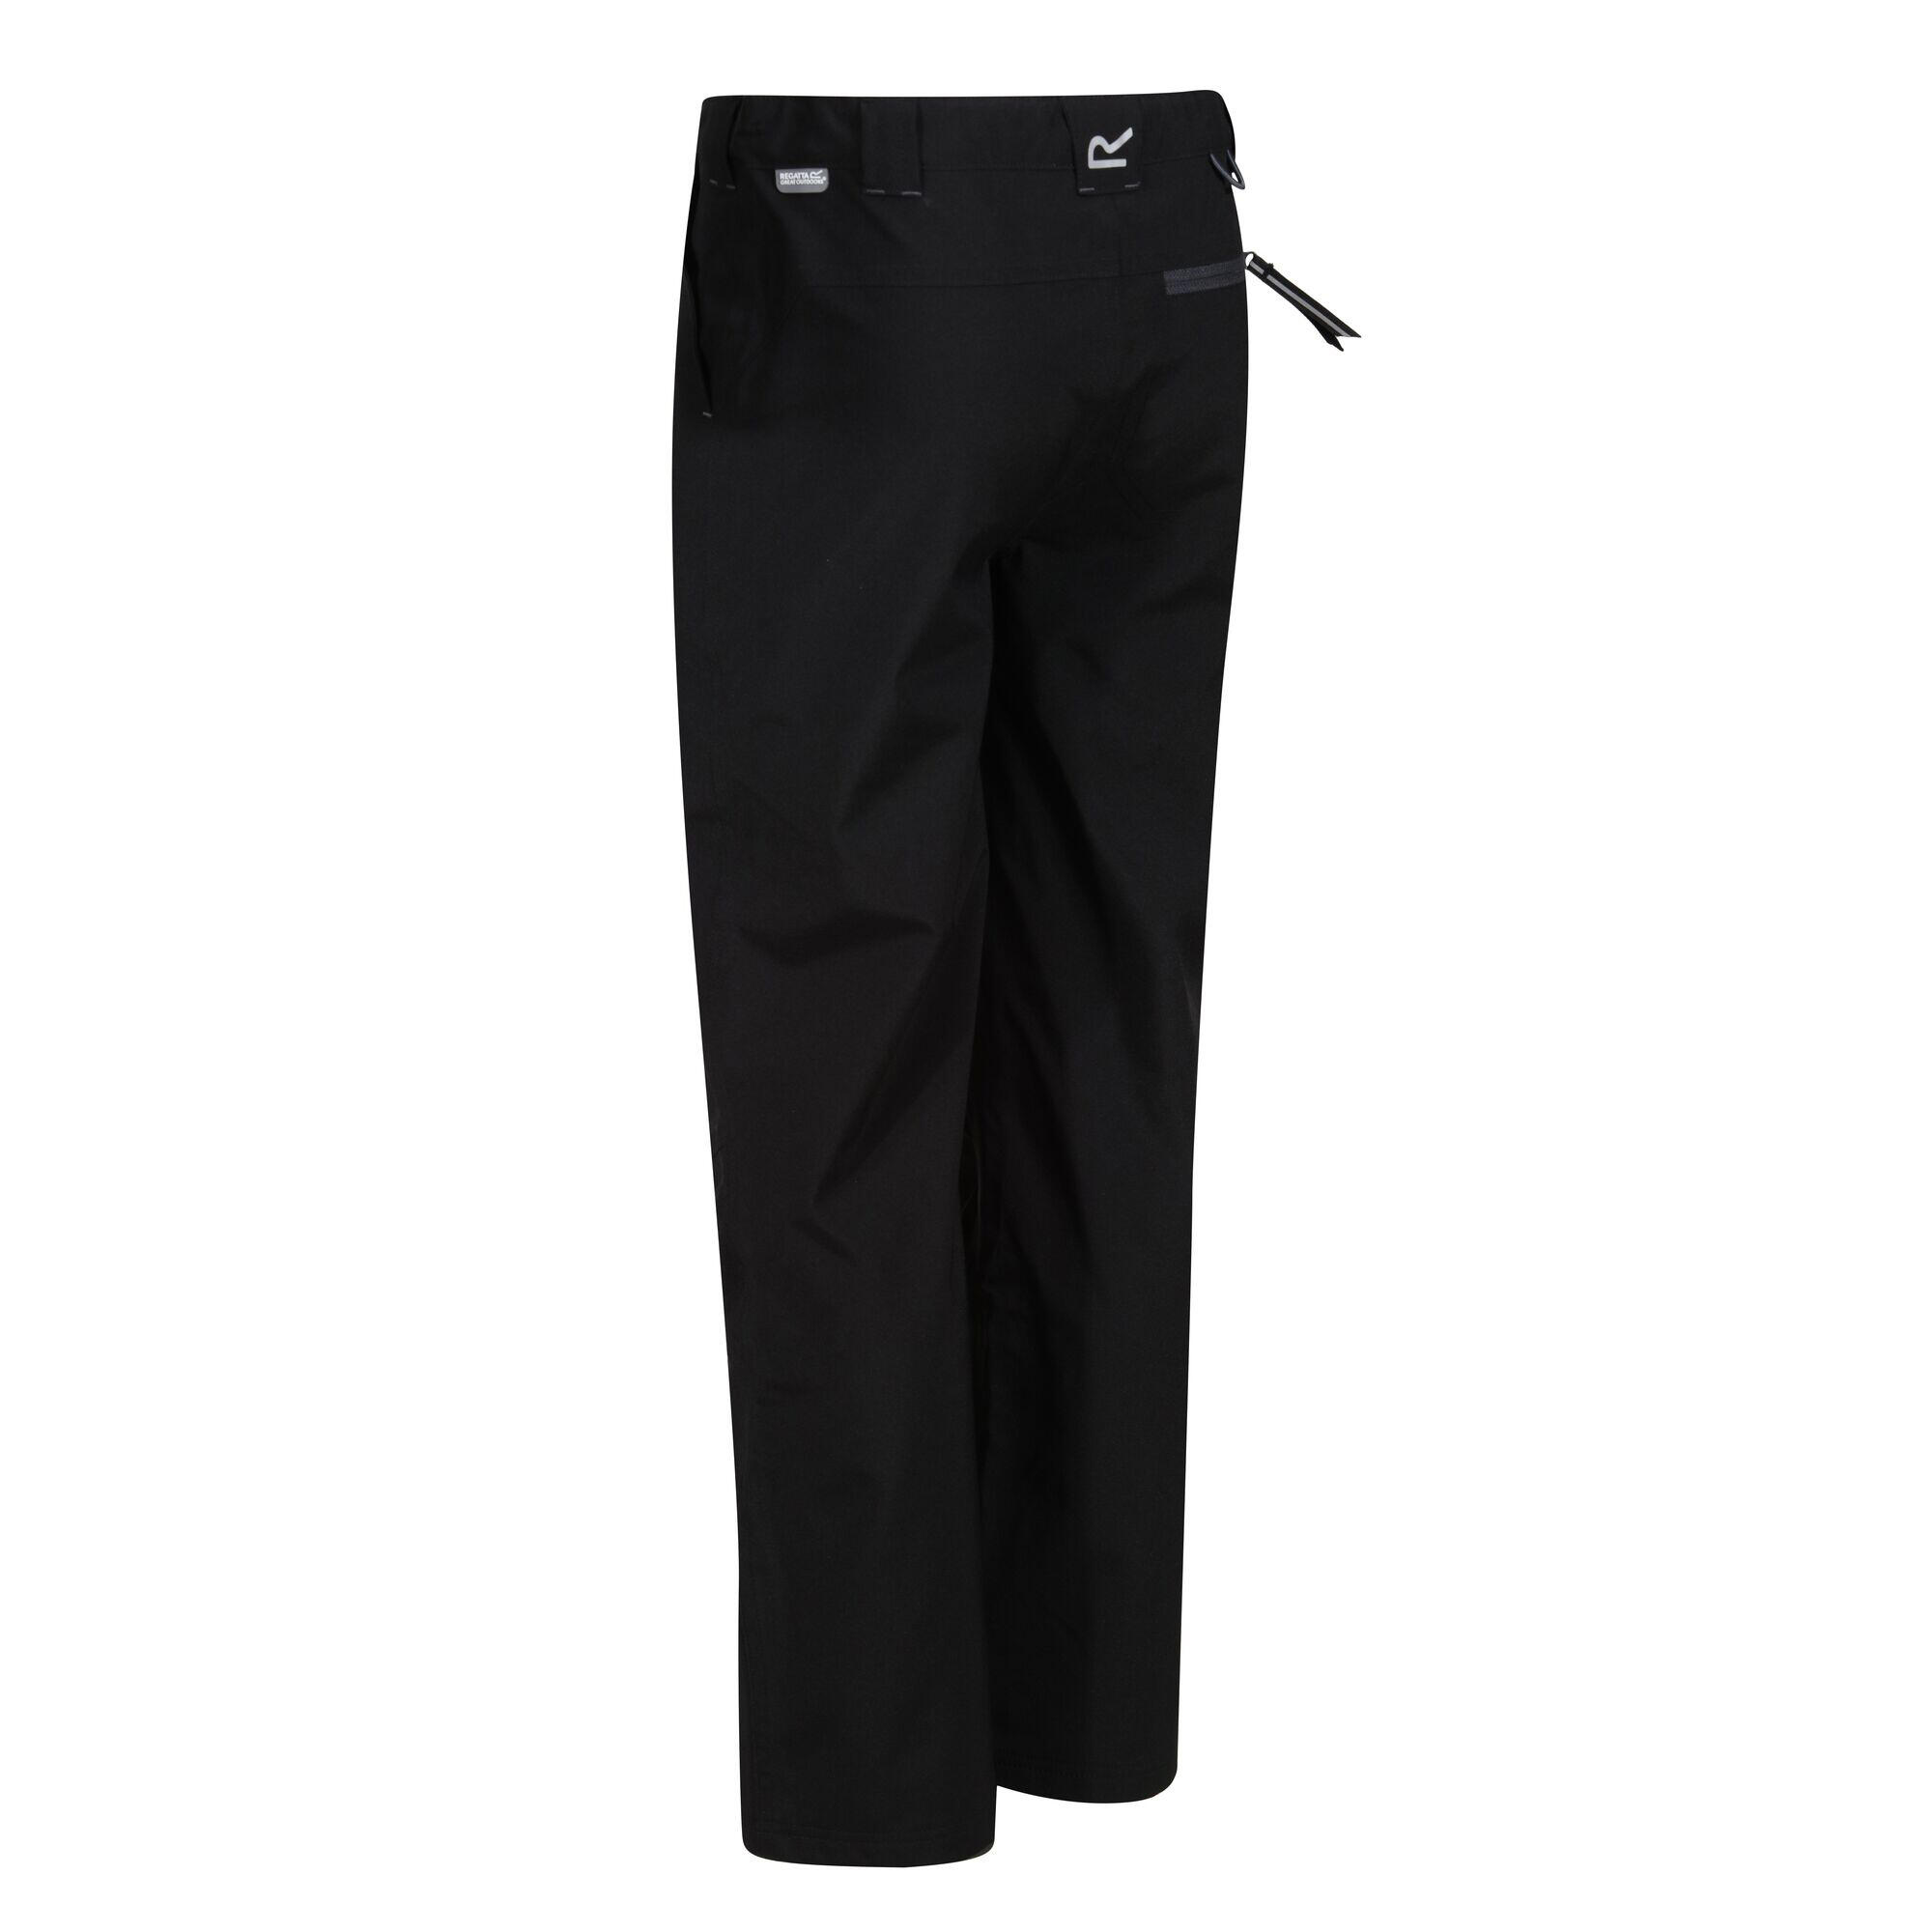 Great Outdoors Childrens/Kids Dayhike II Stretch Trousers (Black) 3/4